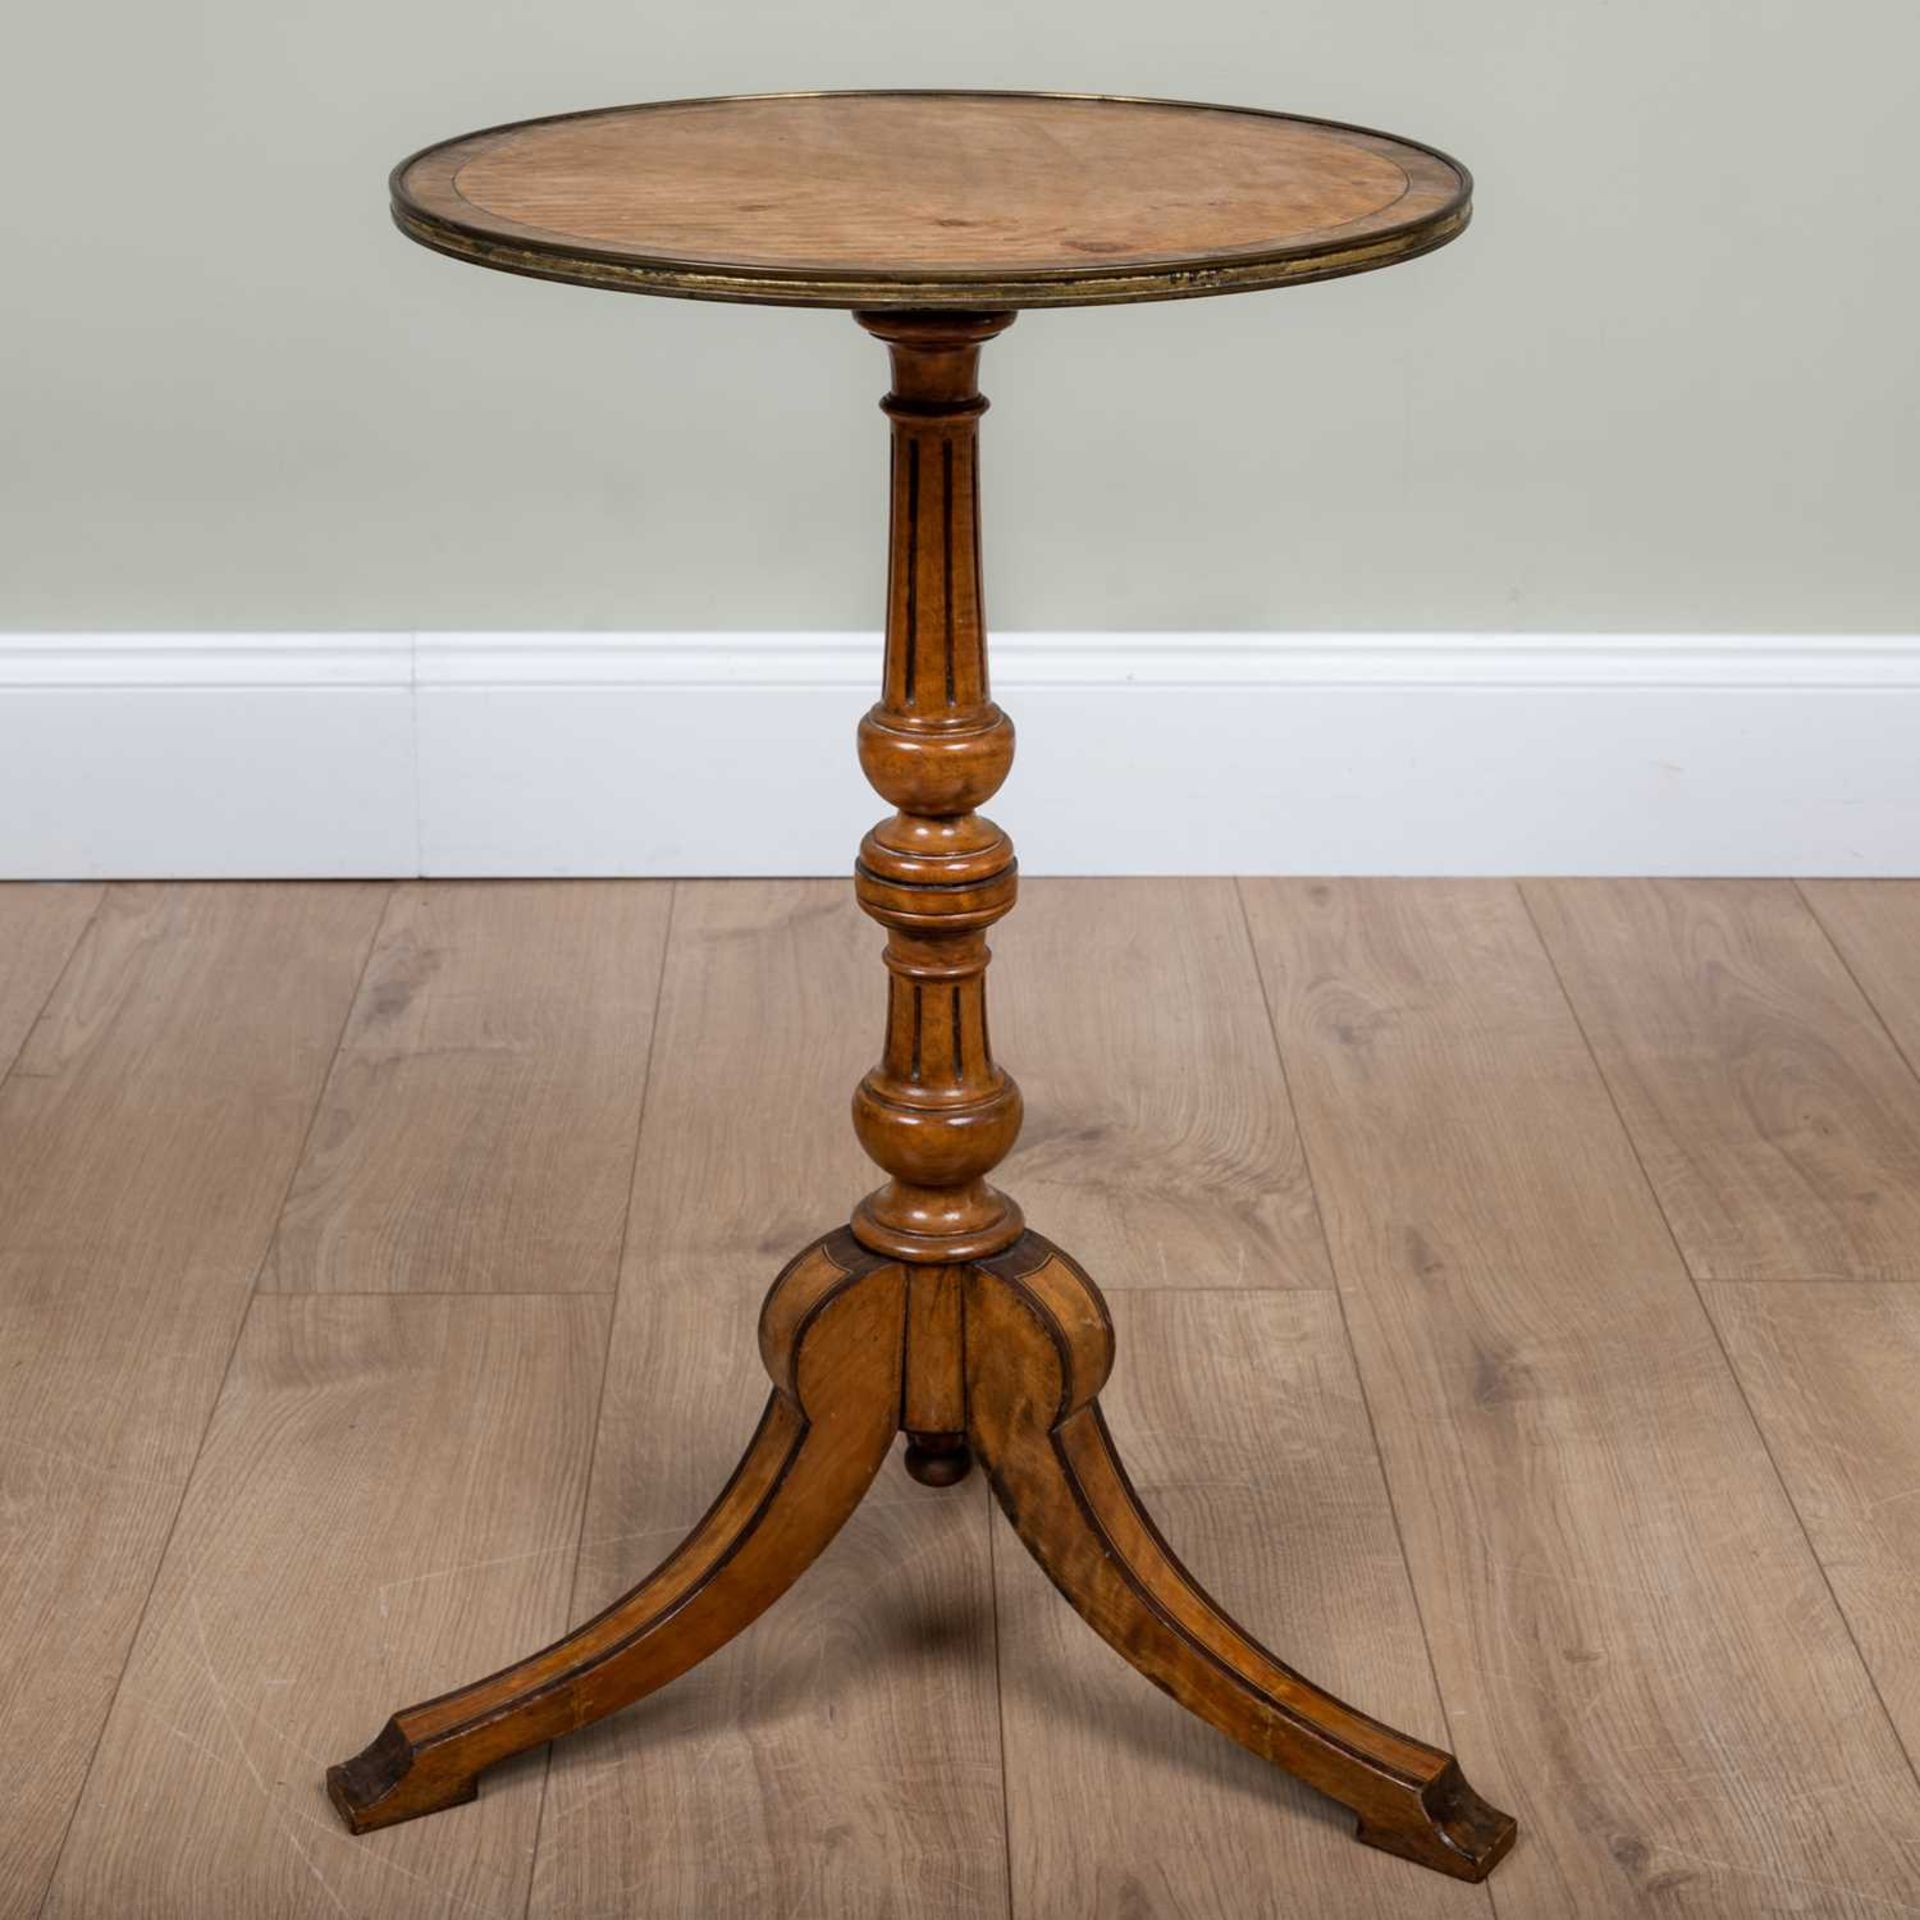 A satinwood circular tripod table with brass edging to the top and decorative inlay to the